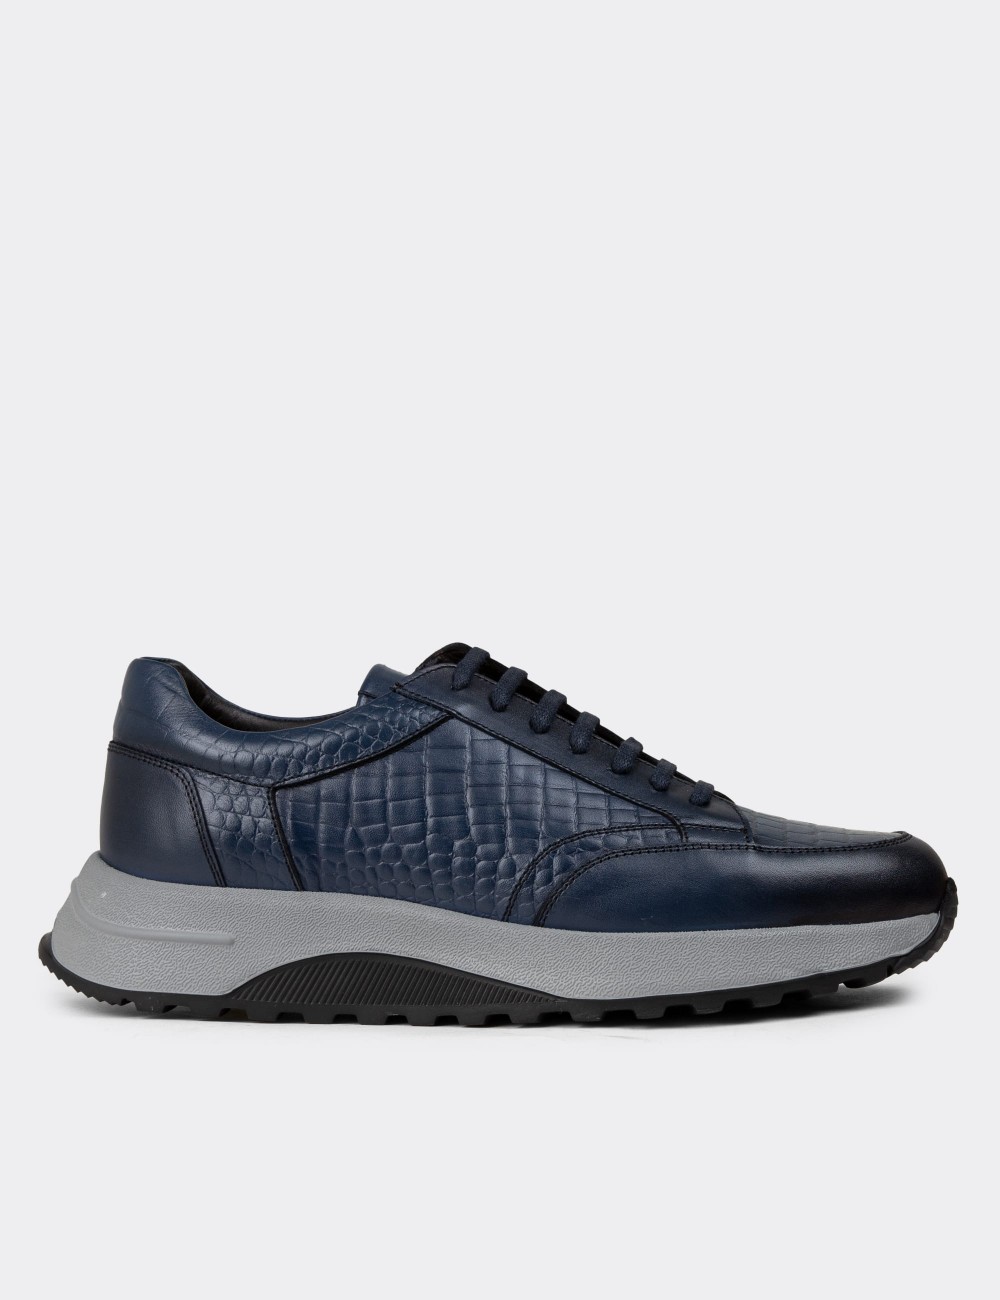 Navy Leather Sneakers - 01984MLCVE01